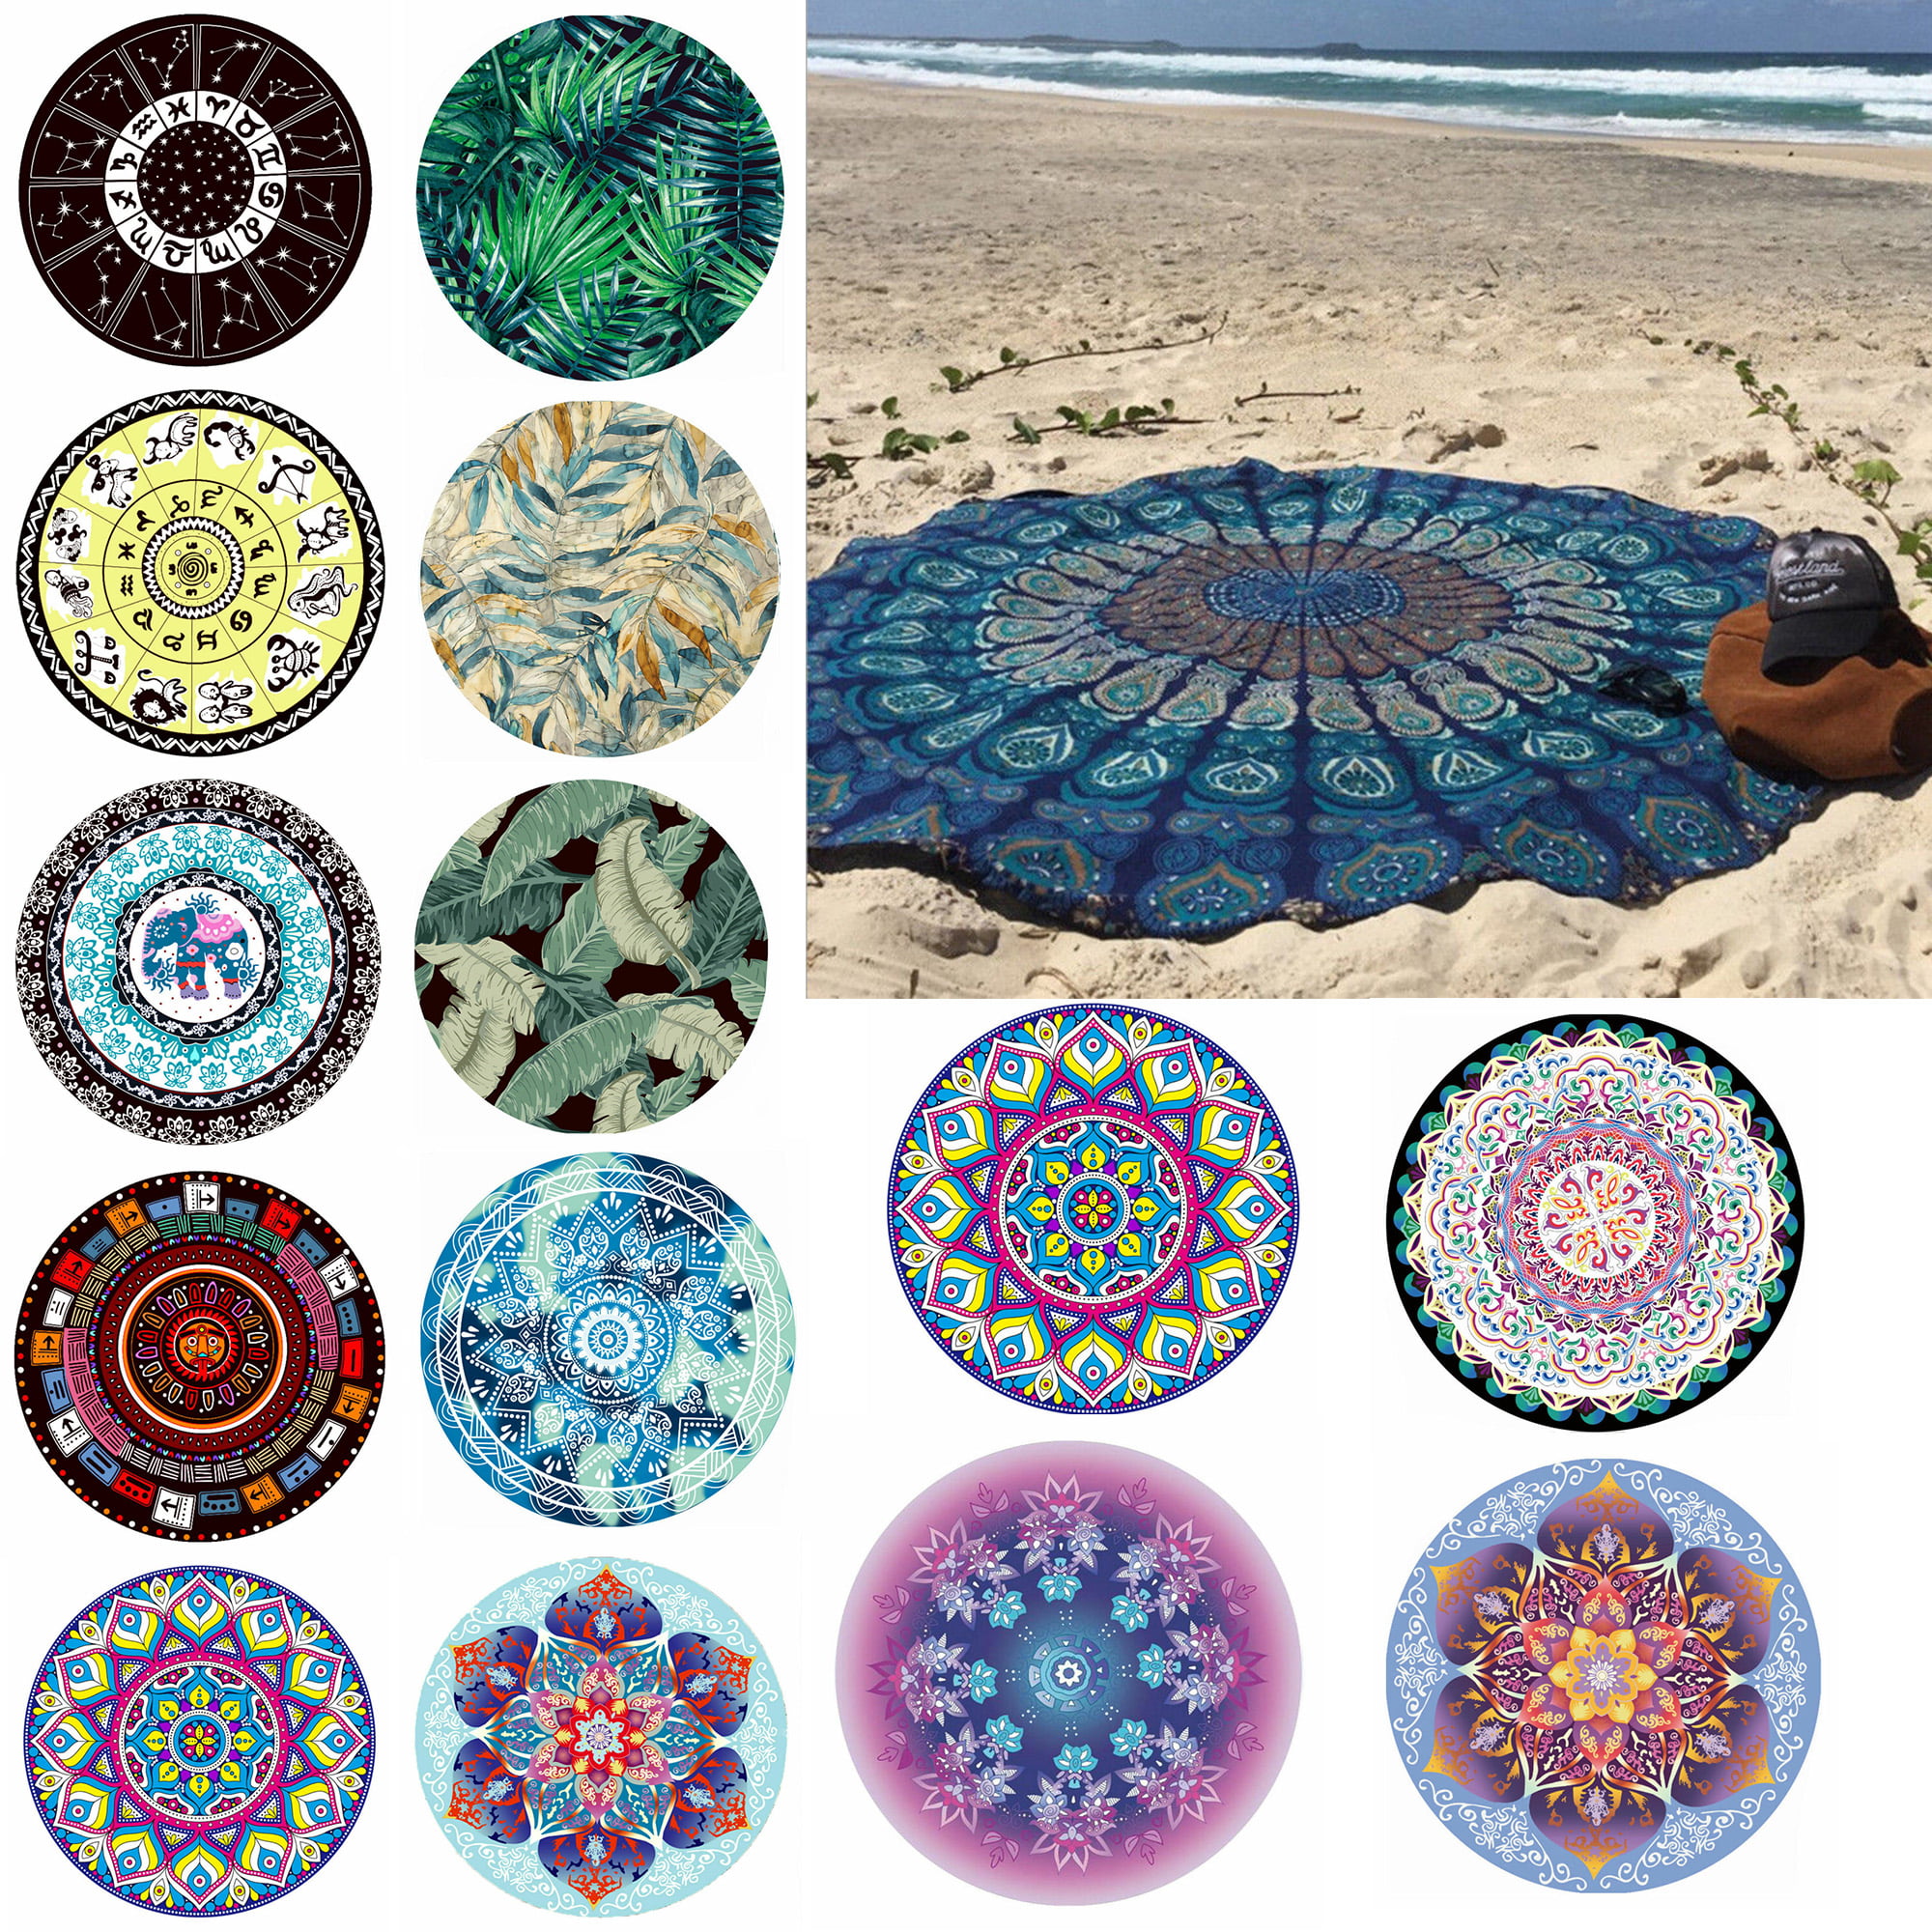 Details about   Indian Beach Throw Cotton Yoga Mat 72" Hippie Round Mandala Tassel Lace Tapestry 